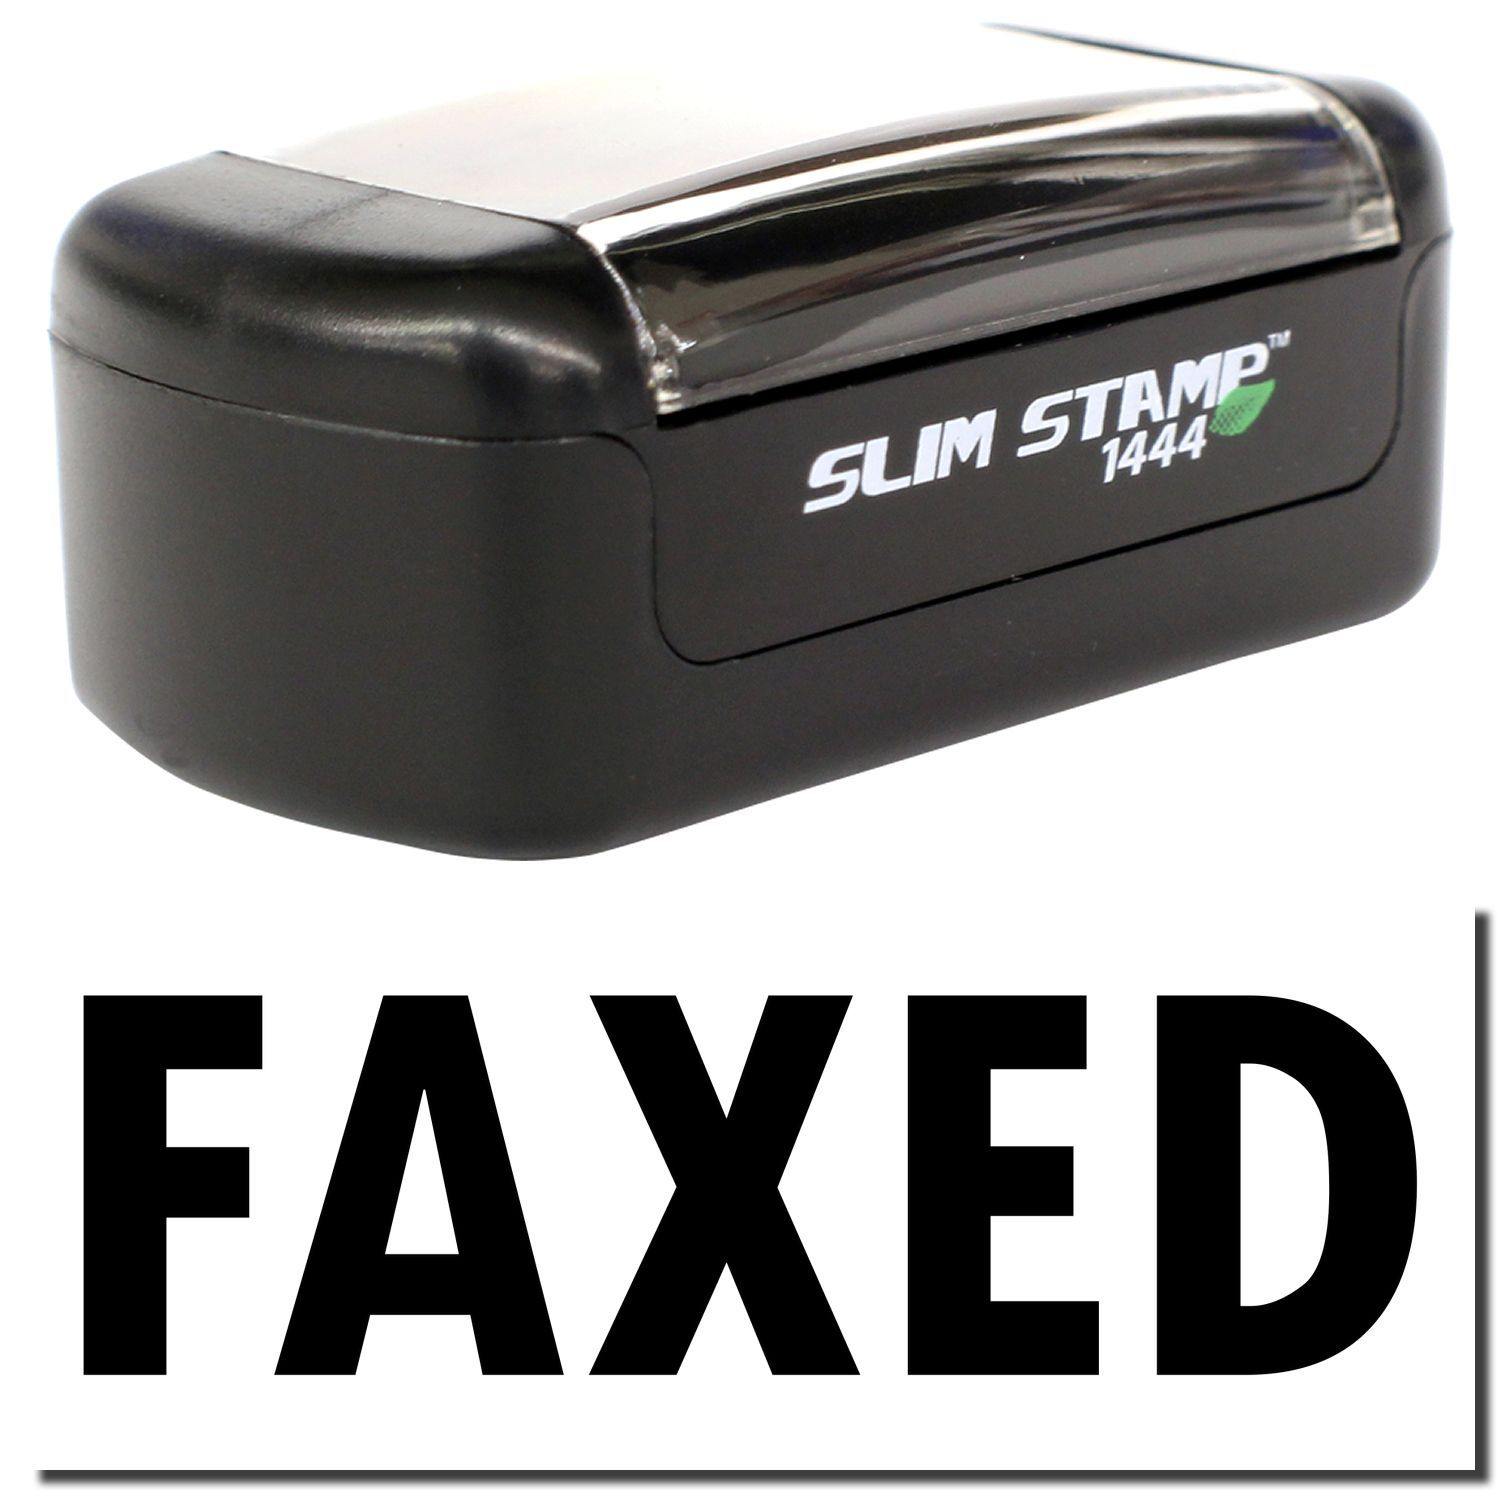 A stock office pre-inked stamp with a stamped image showing how the text "FAXED" is displayed after stamping.